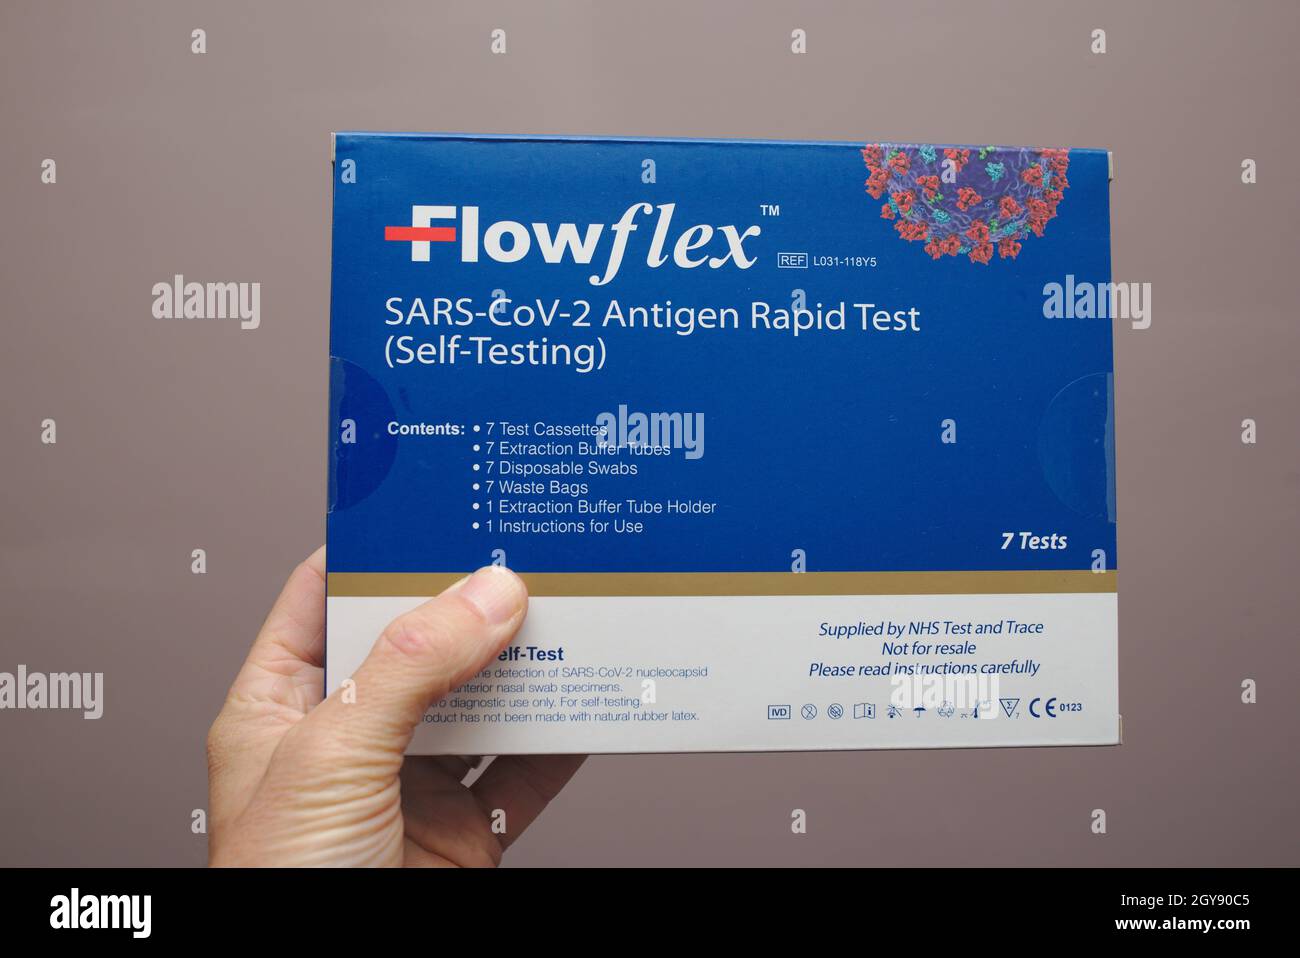 Covid 19 antigen rapid test packs of several lateral flow tests for SARS-CV-2 coronavirus self testing. Stock Photo